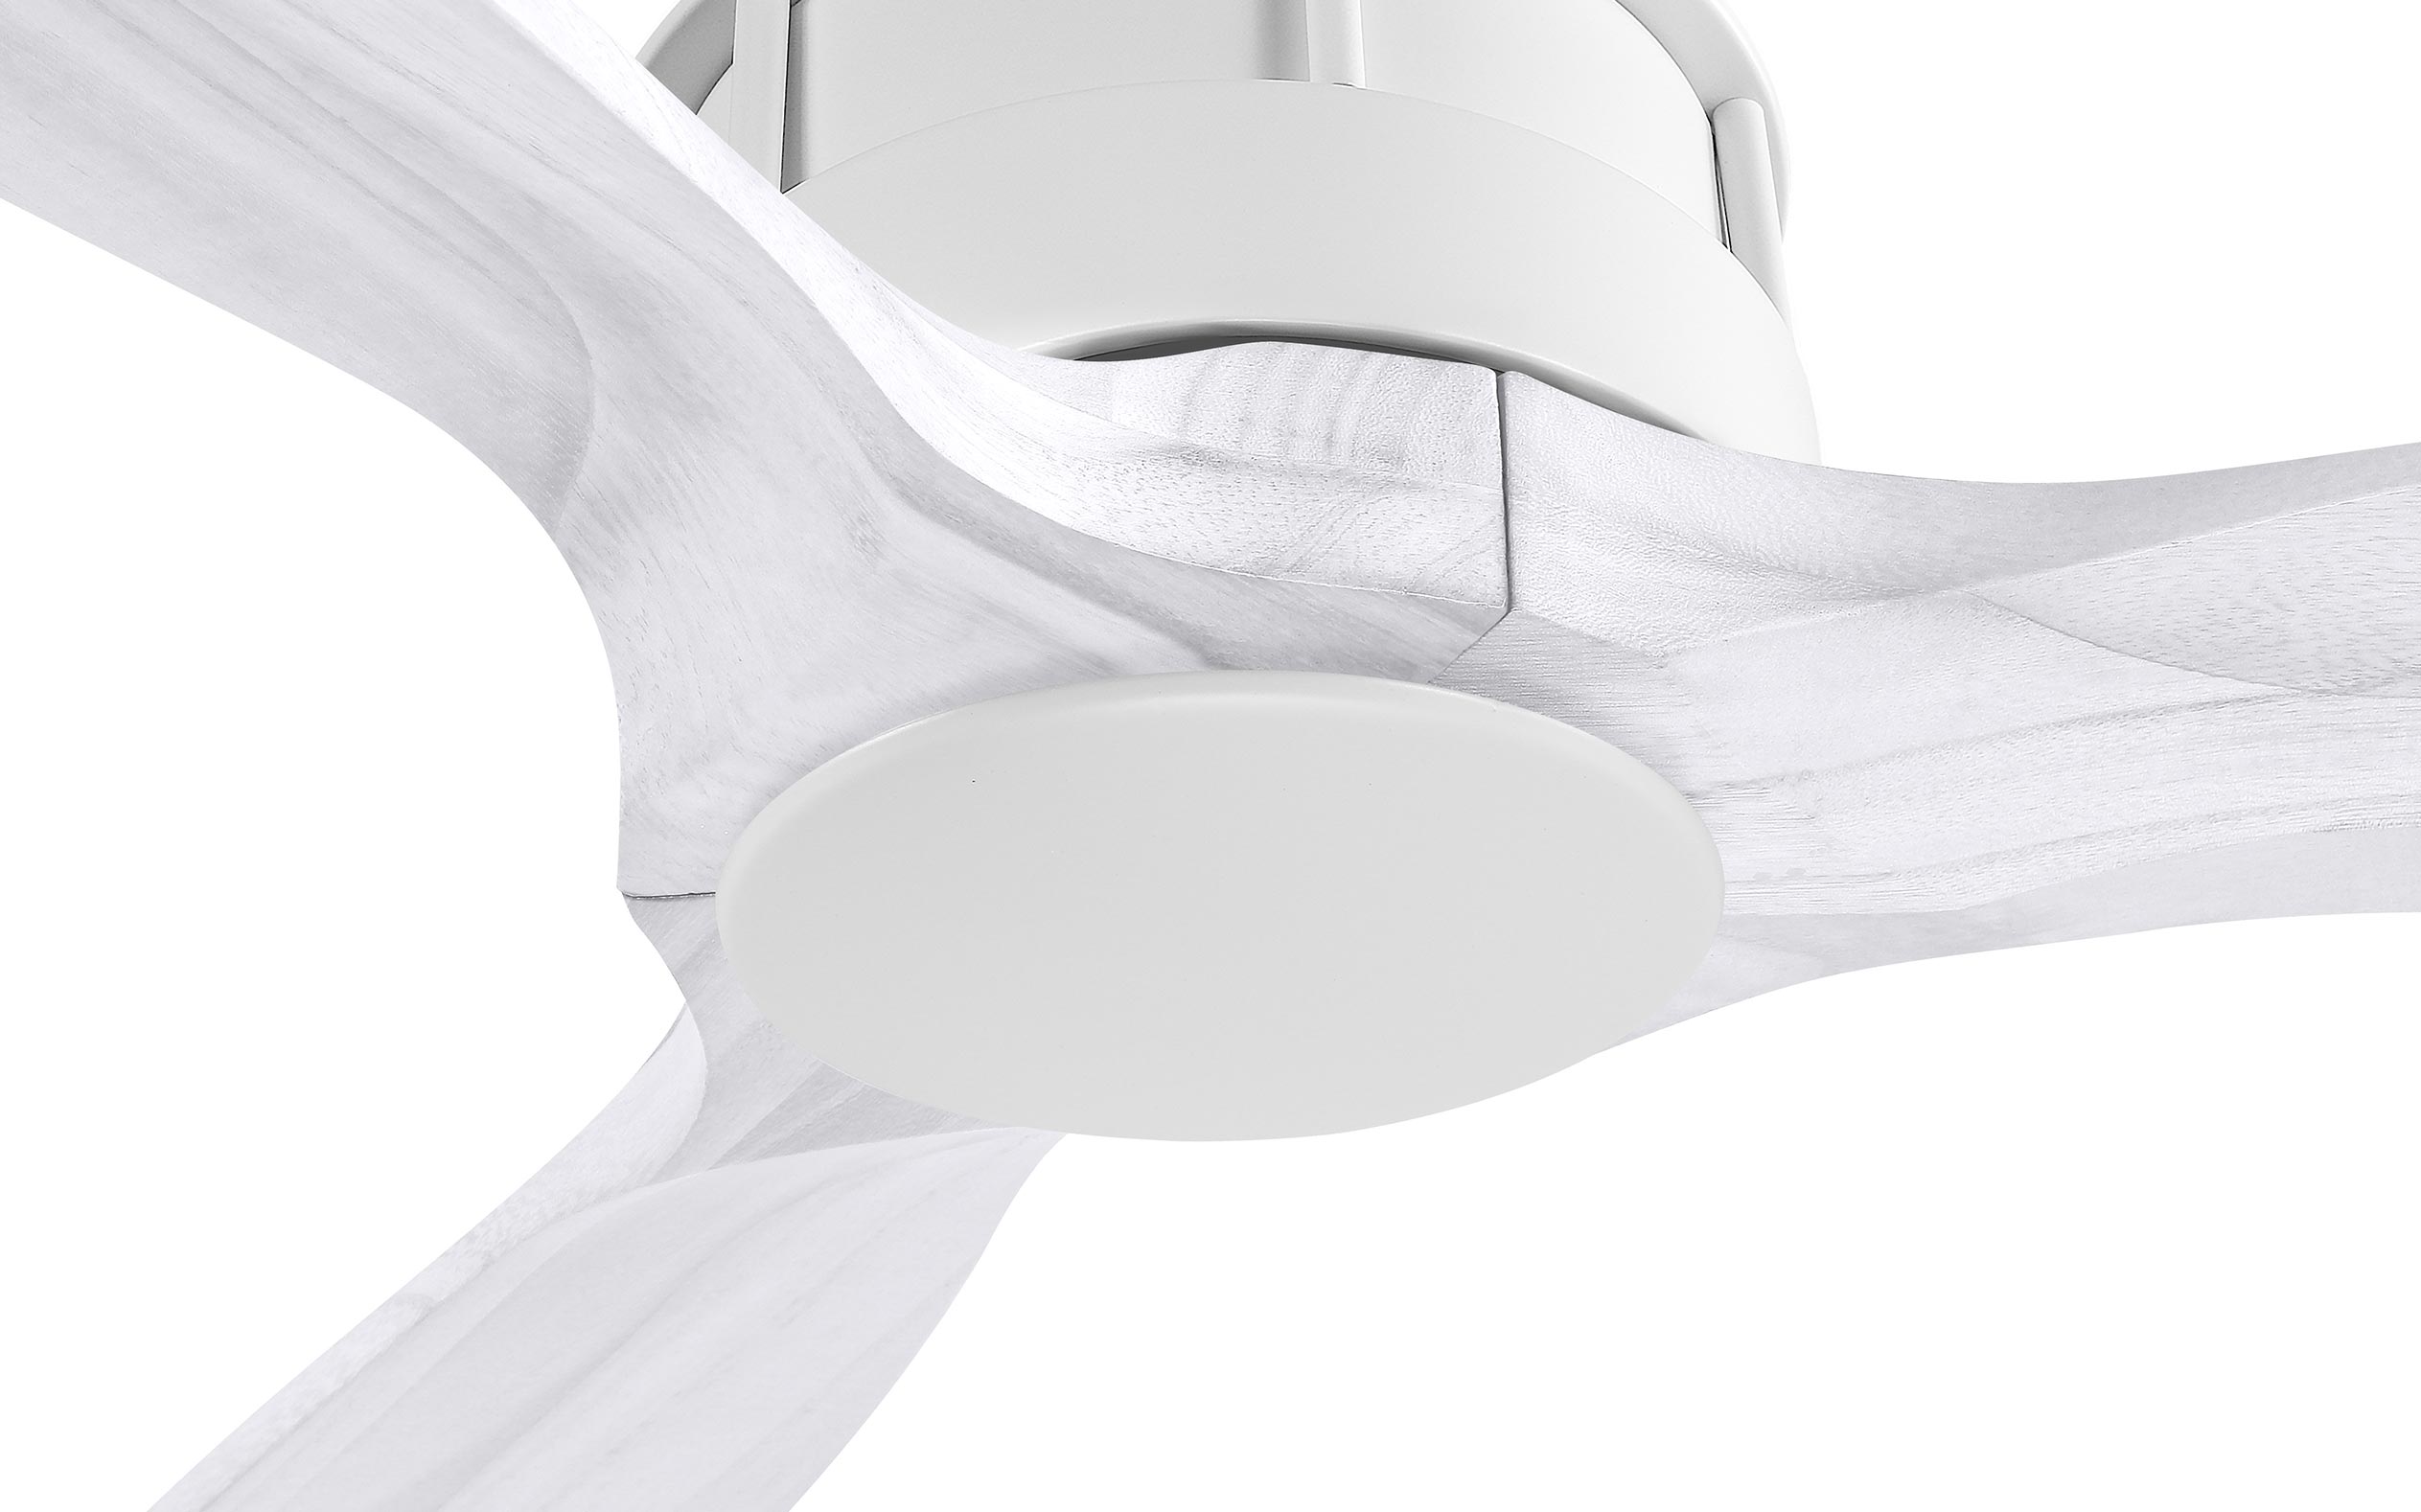 Onyx Ceiling Fan - #Body Color_White|Blade Color_White